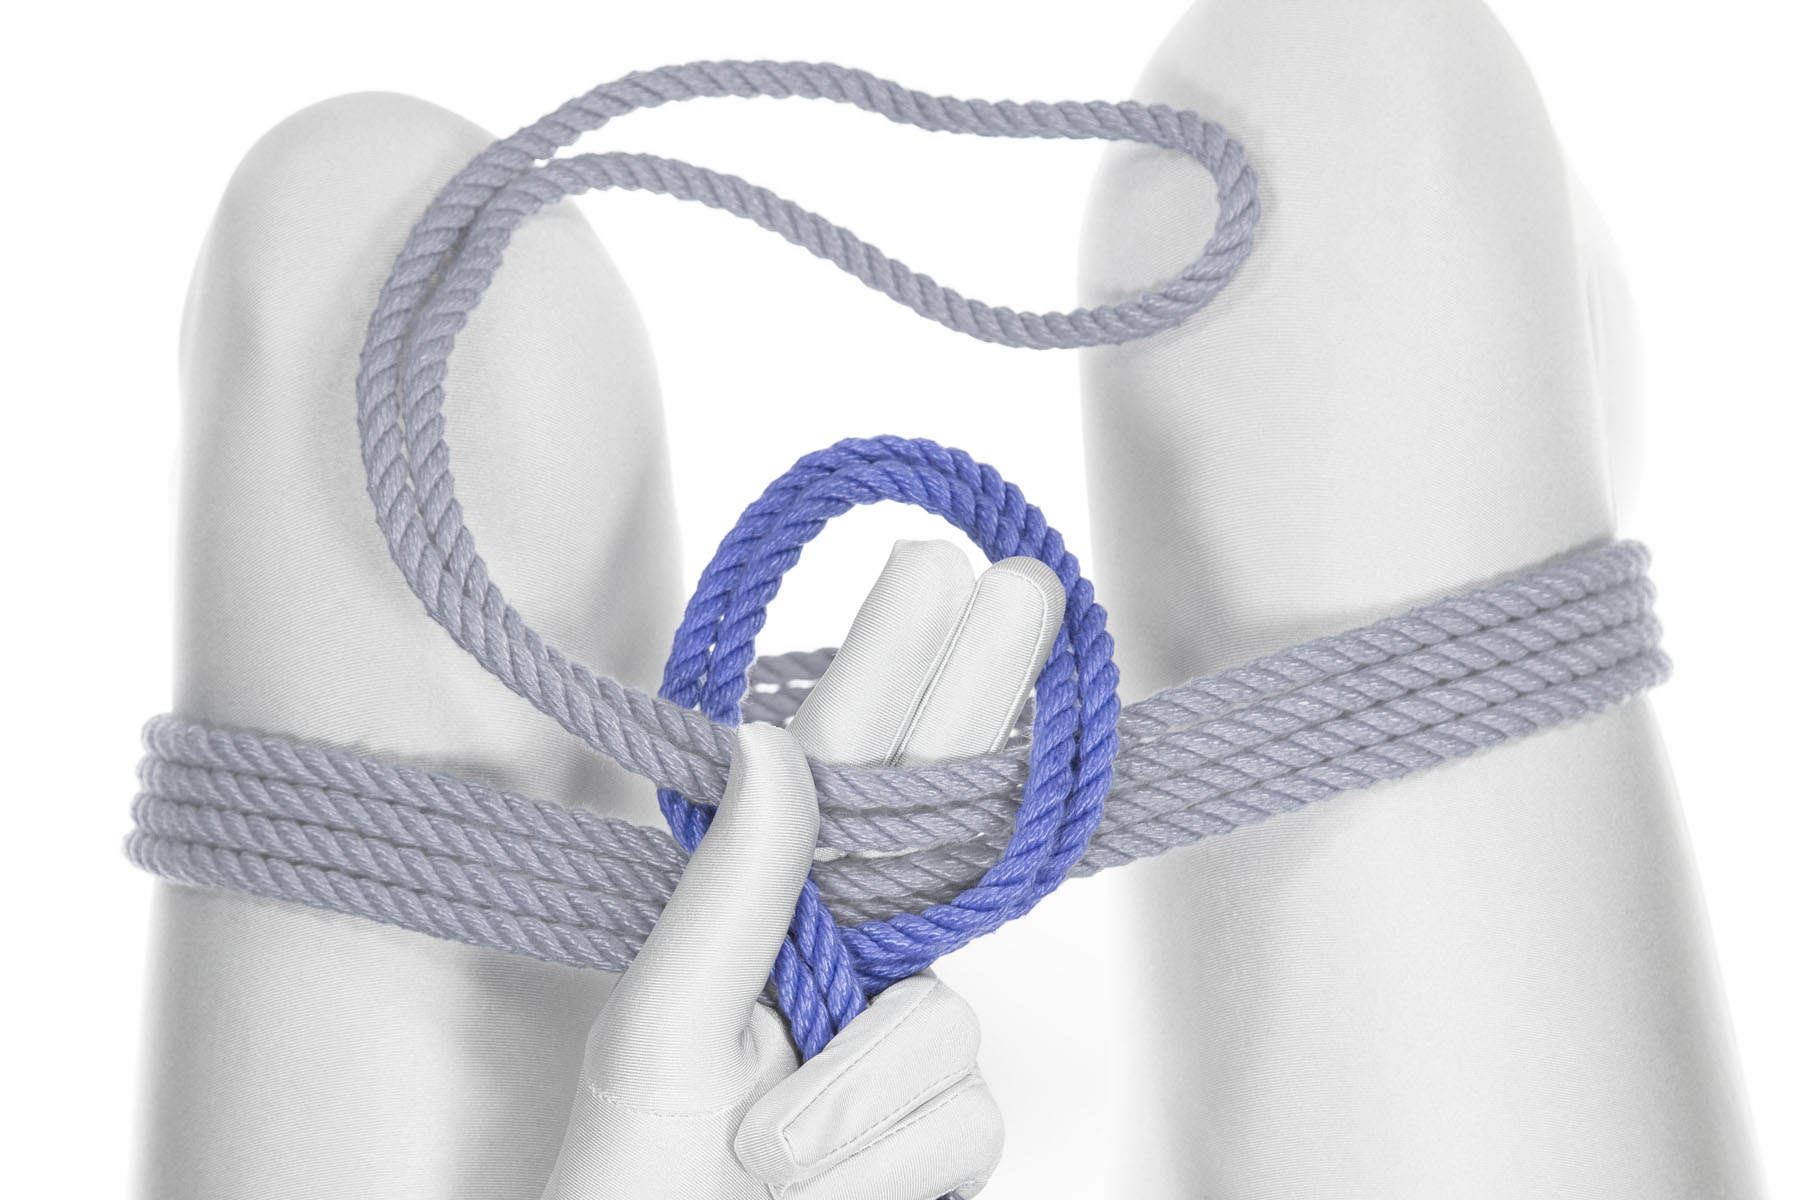 The standing part of the rope has made a four inch diameter loop around the bight. The bight and the index and middle fingers both pass upward through the loop. The standing part makes an X shape where it crosses over itself right by the base of the thumb.